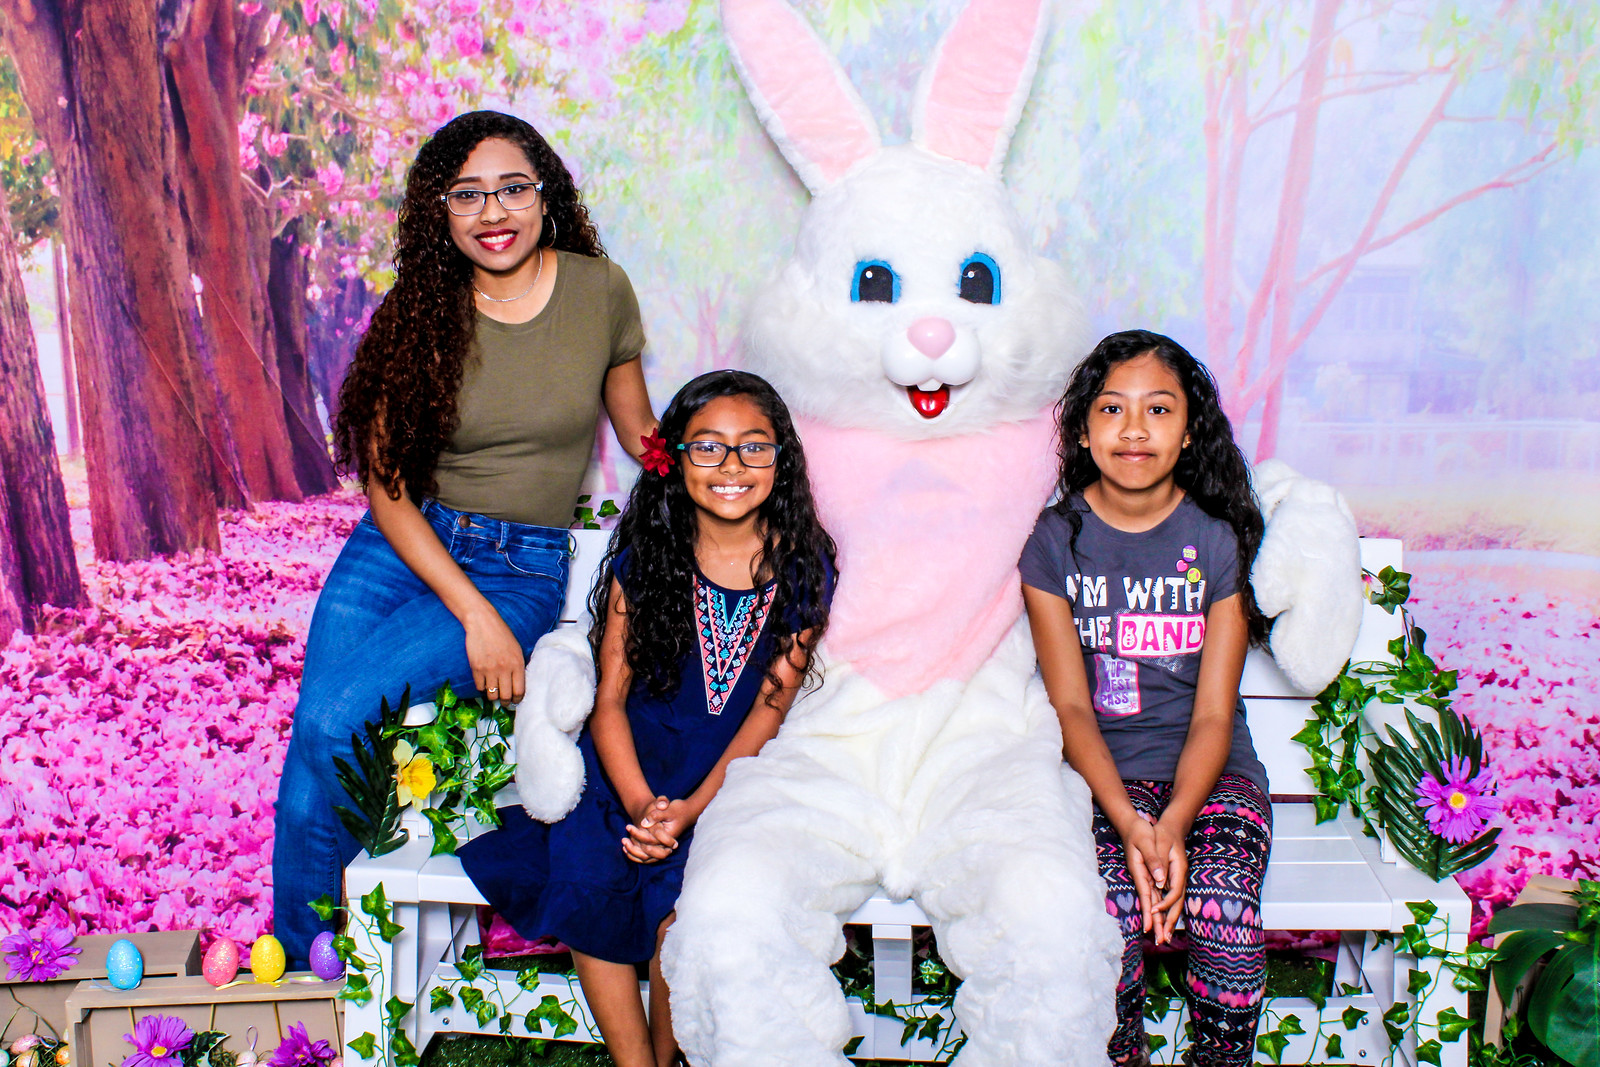 Photos with Easter Bunny